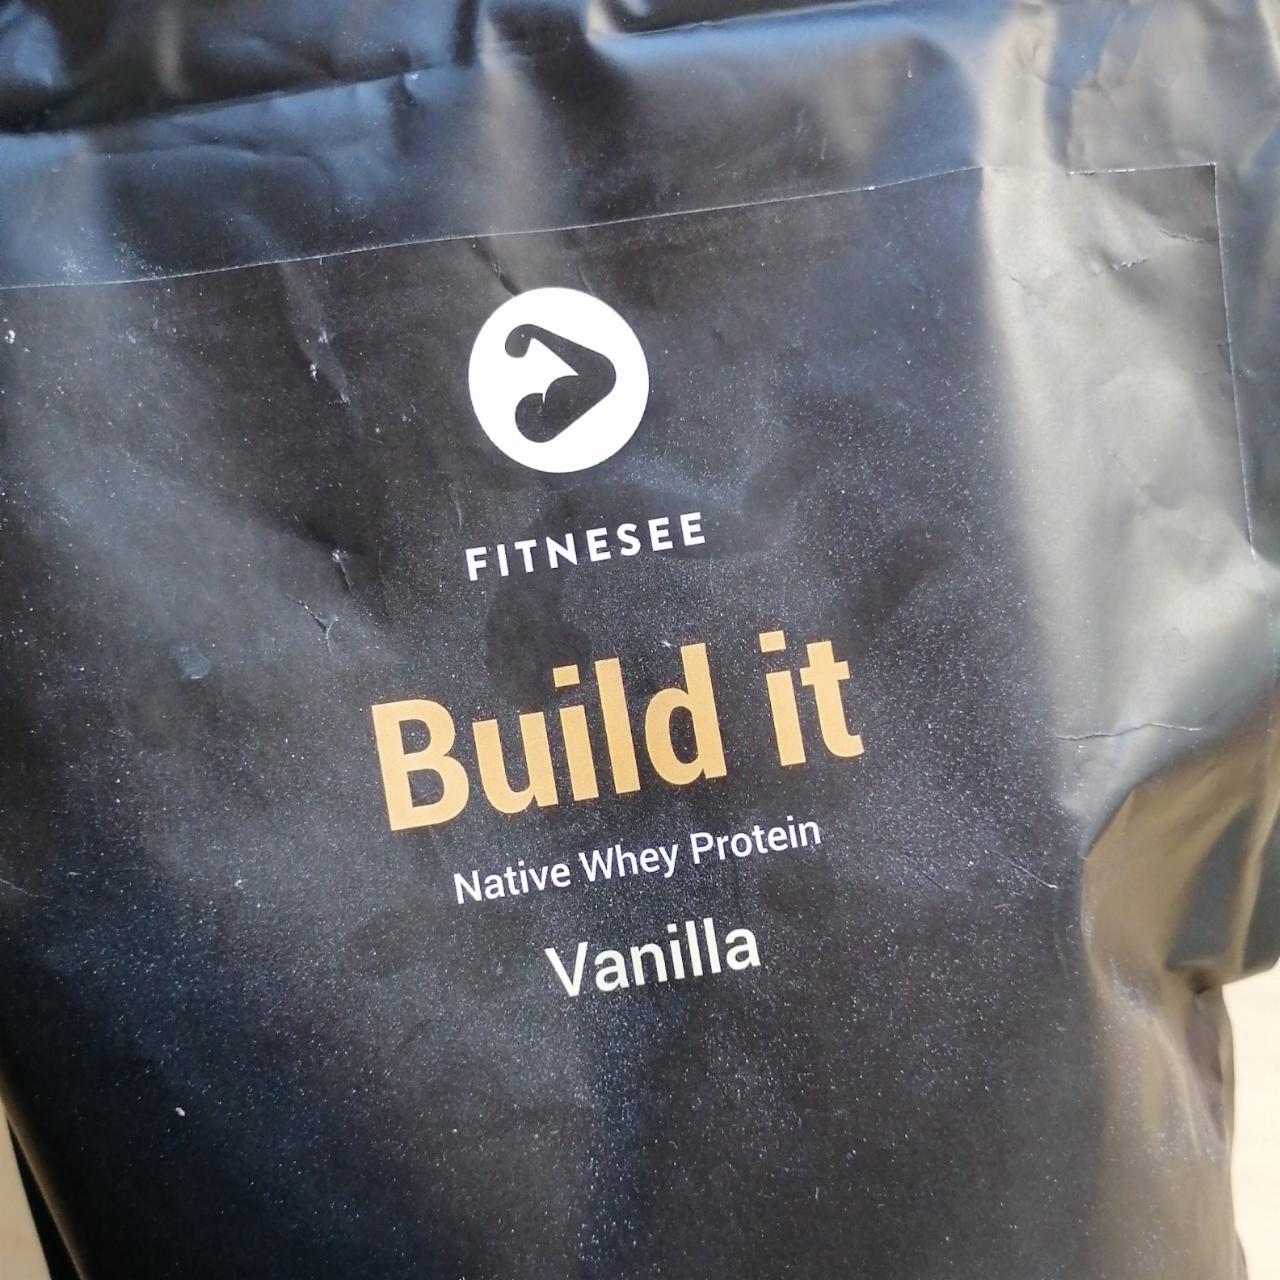 Fotografie - Fitnesee Build it Native Whey Protein